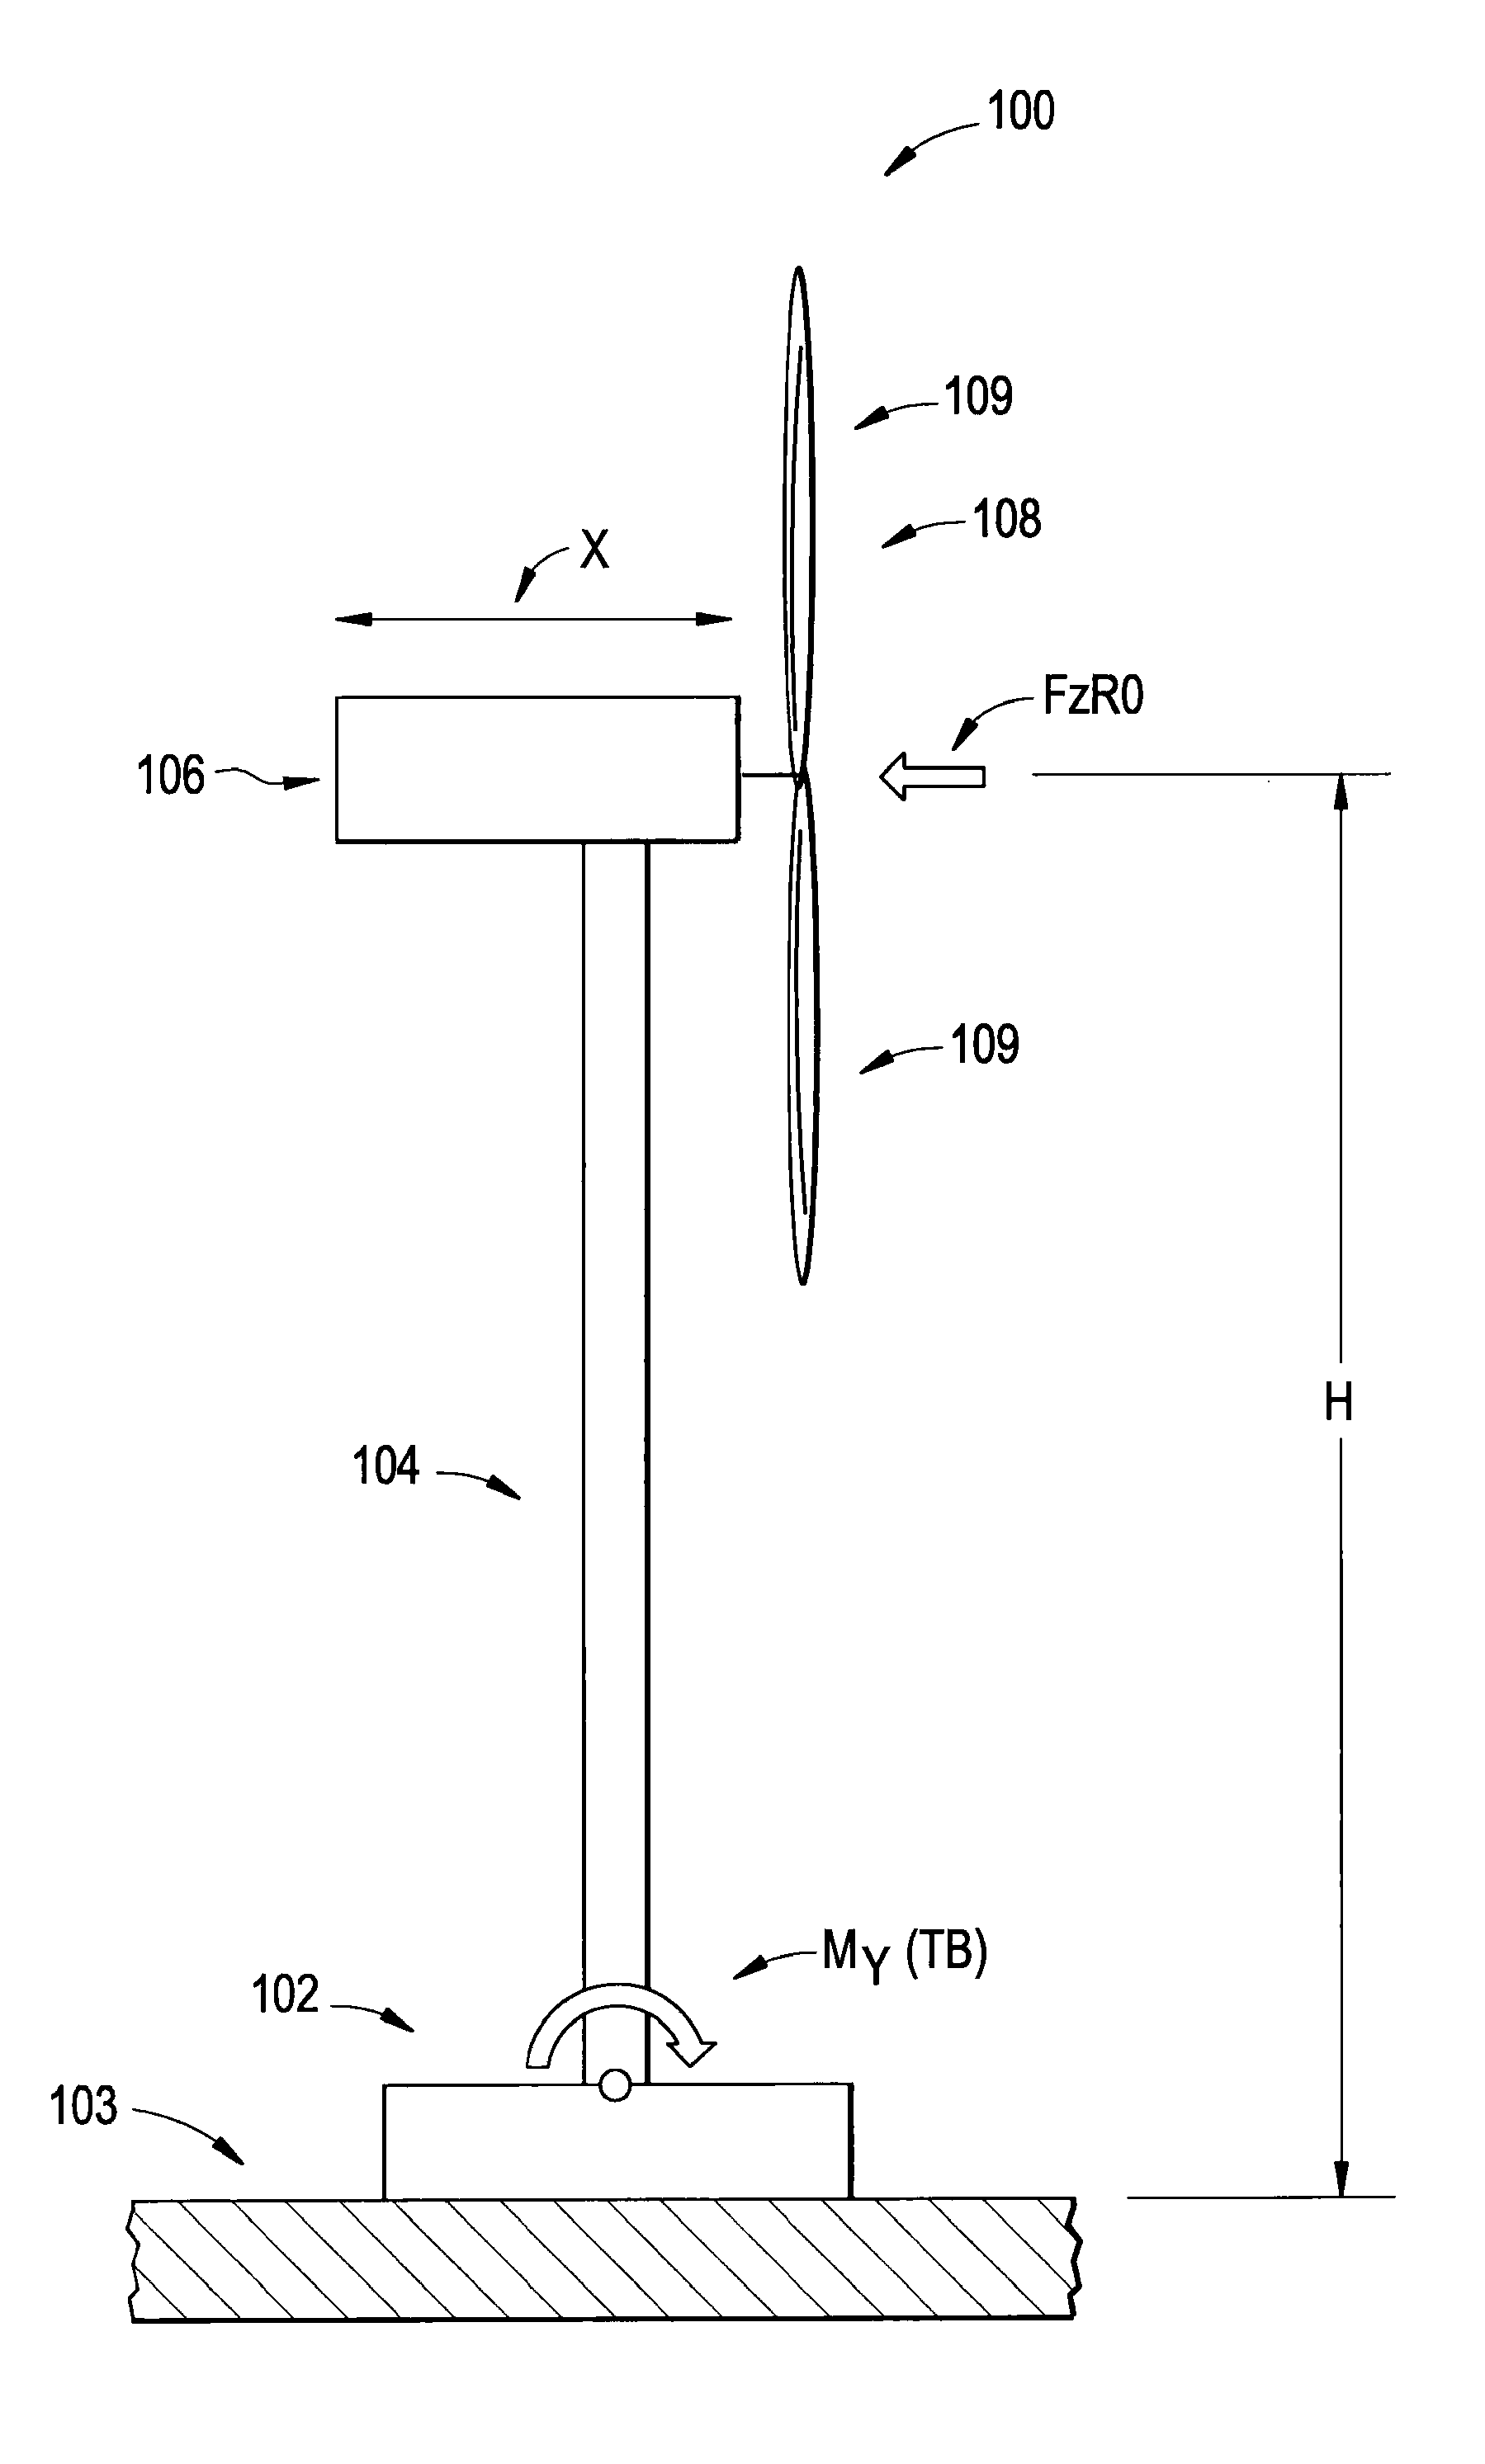 Systems and methods involving wind turbine towers for power applications